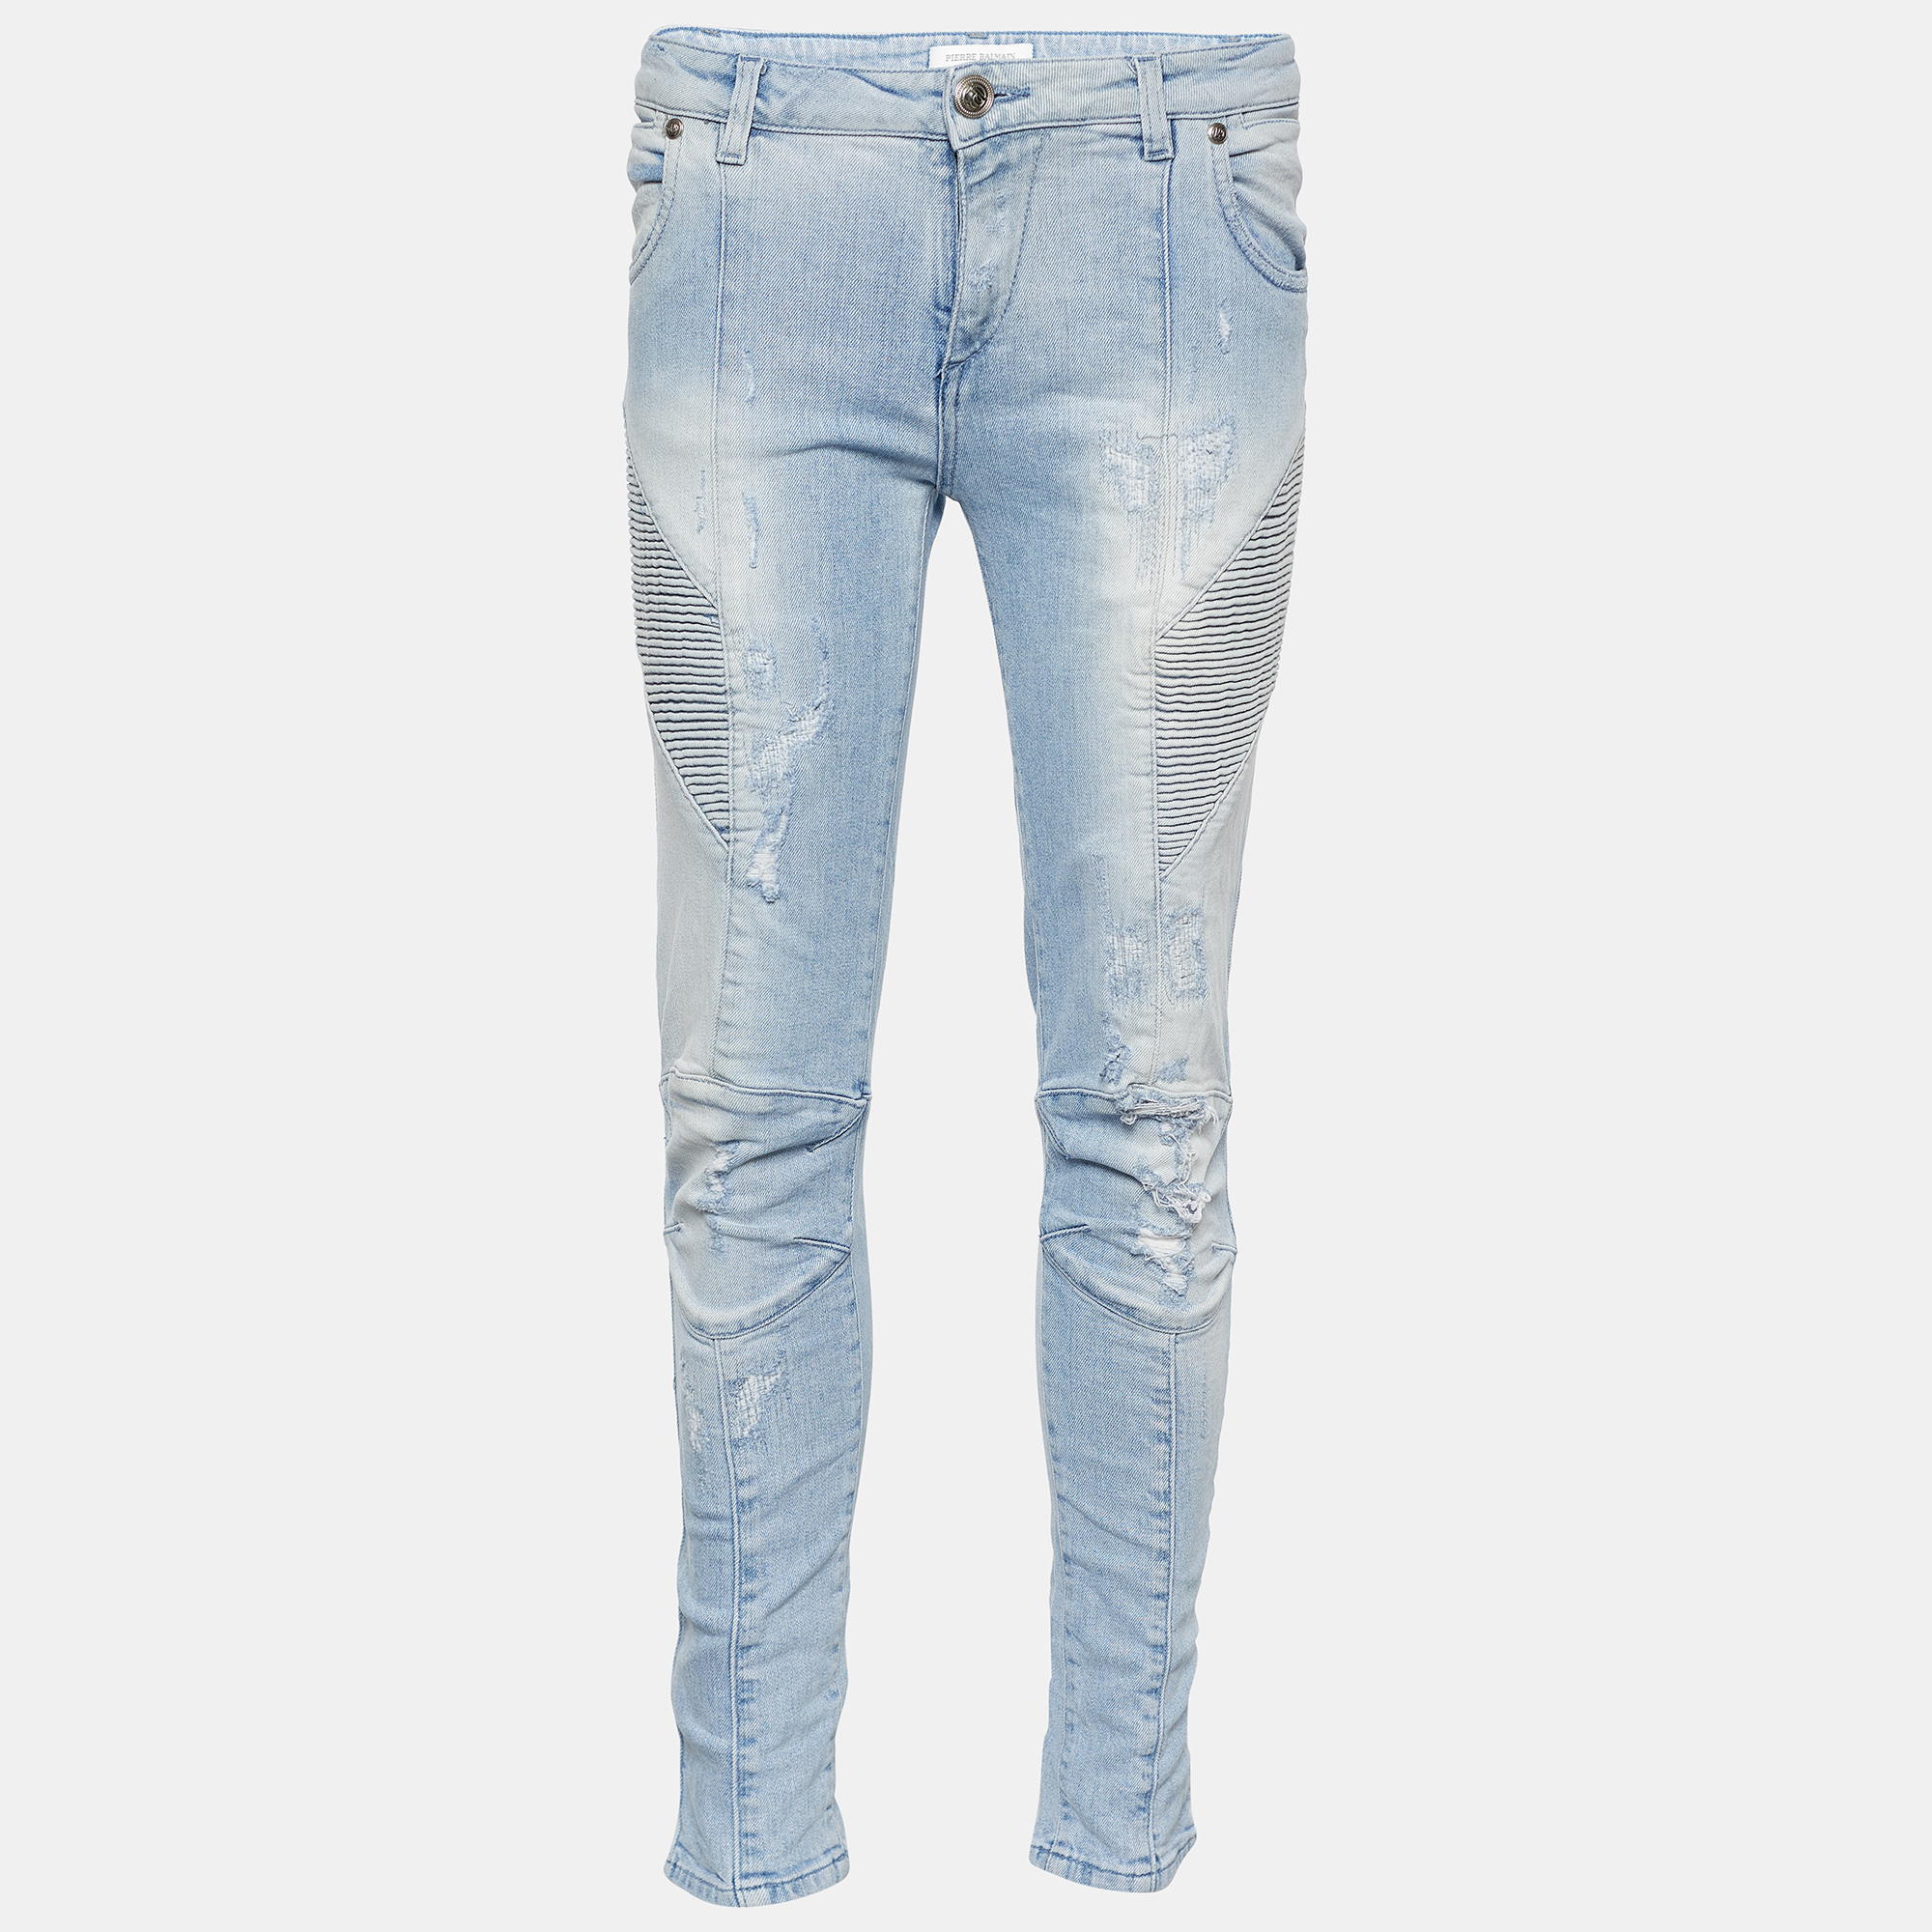 These jeans from Pierre Balmain are definitely a classy pair to own They are created using blue denim fabric and showcase distressed detailing zipper closure and four pockets. Put on these jeans and achieve a trendy casual style.